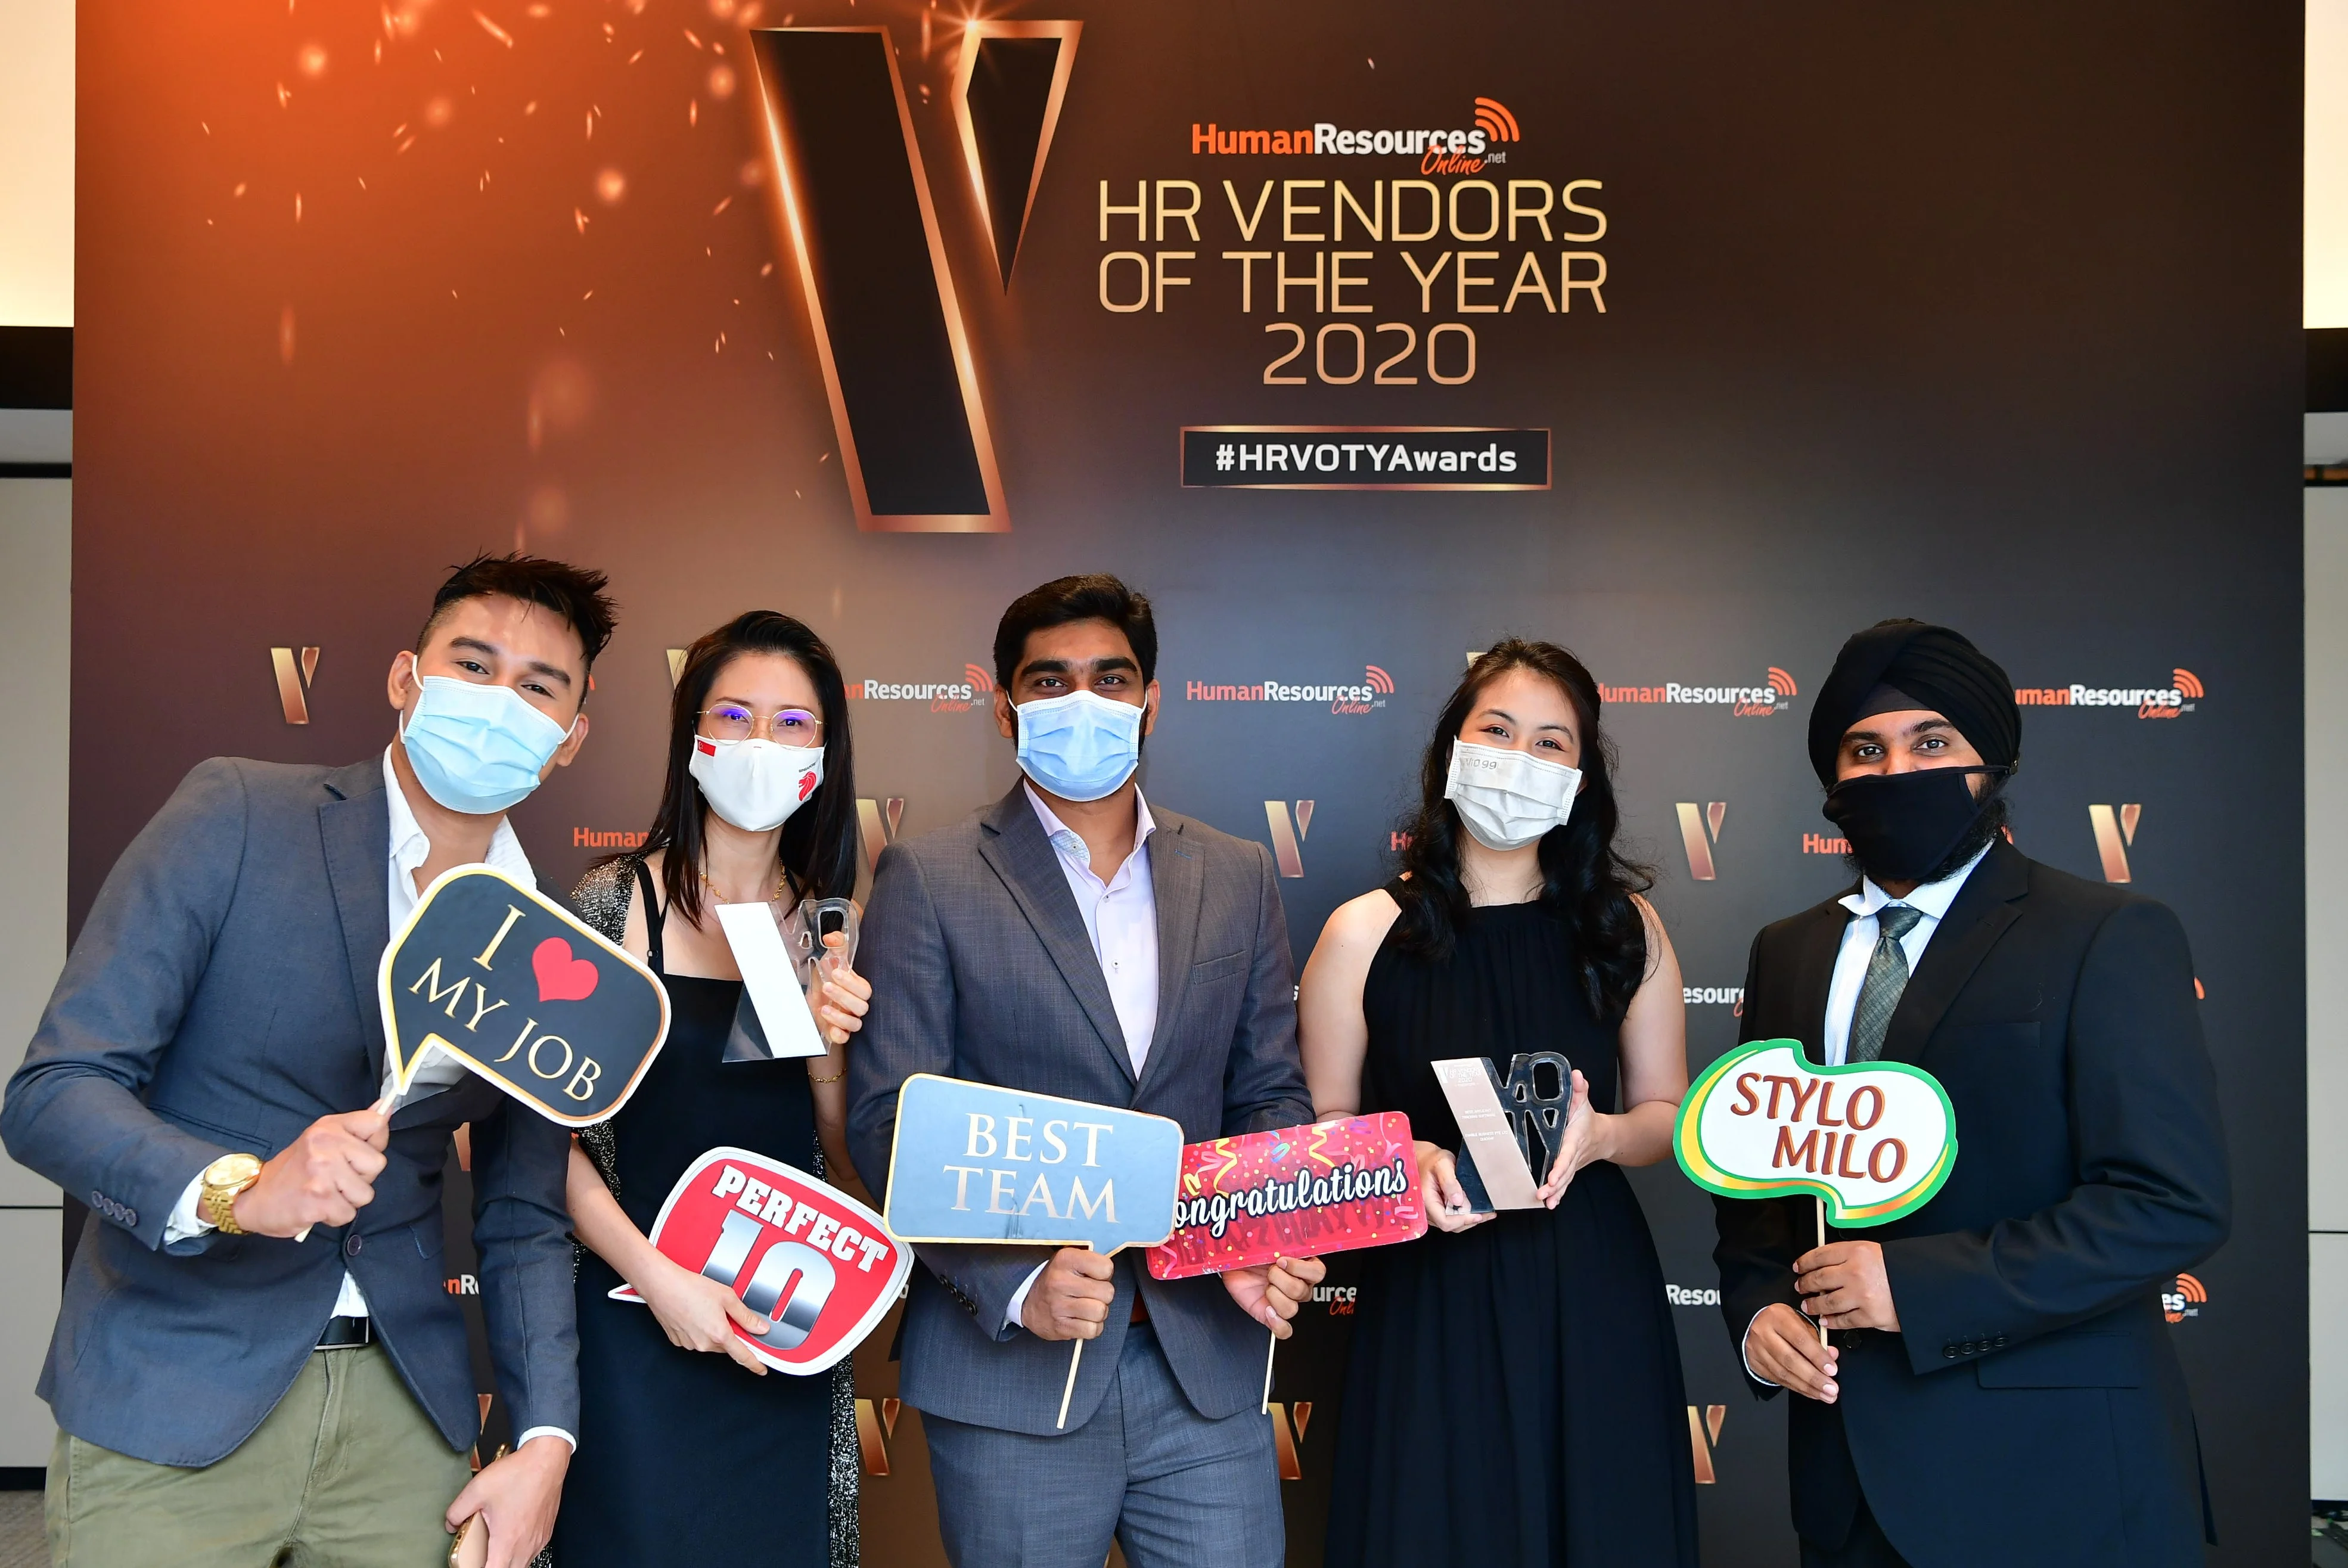 HR Vendor of the Year Award 2020 ceremony